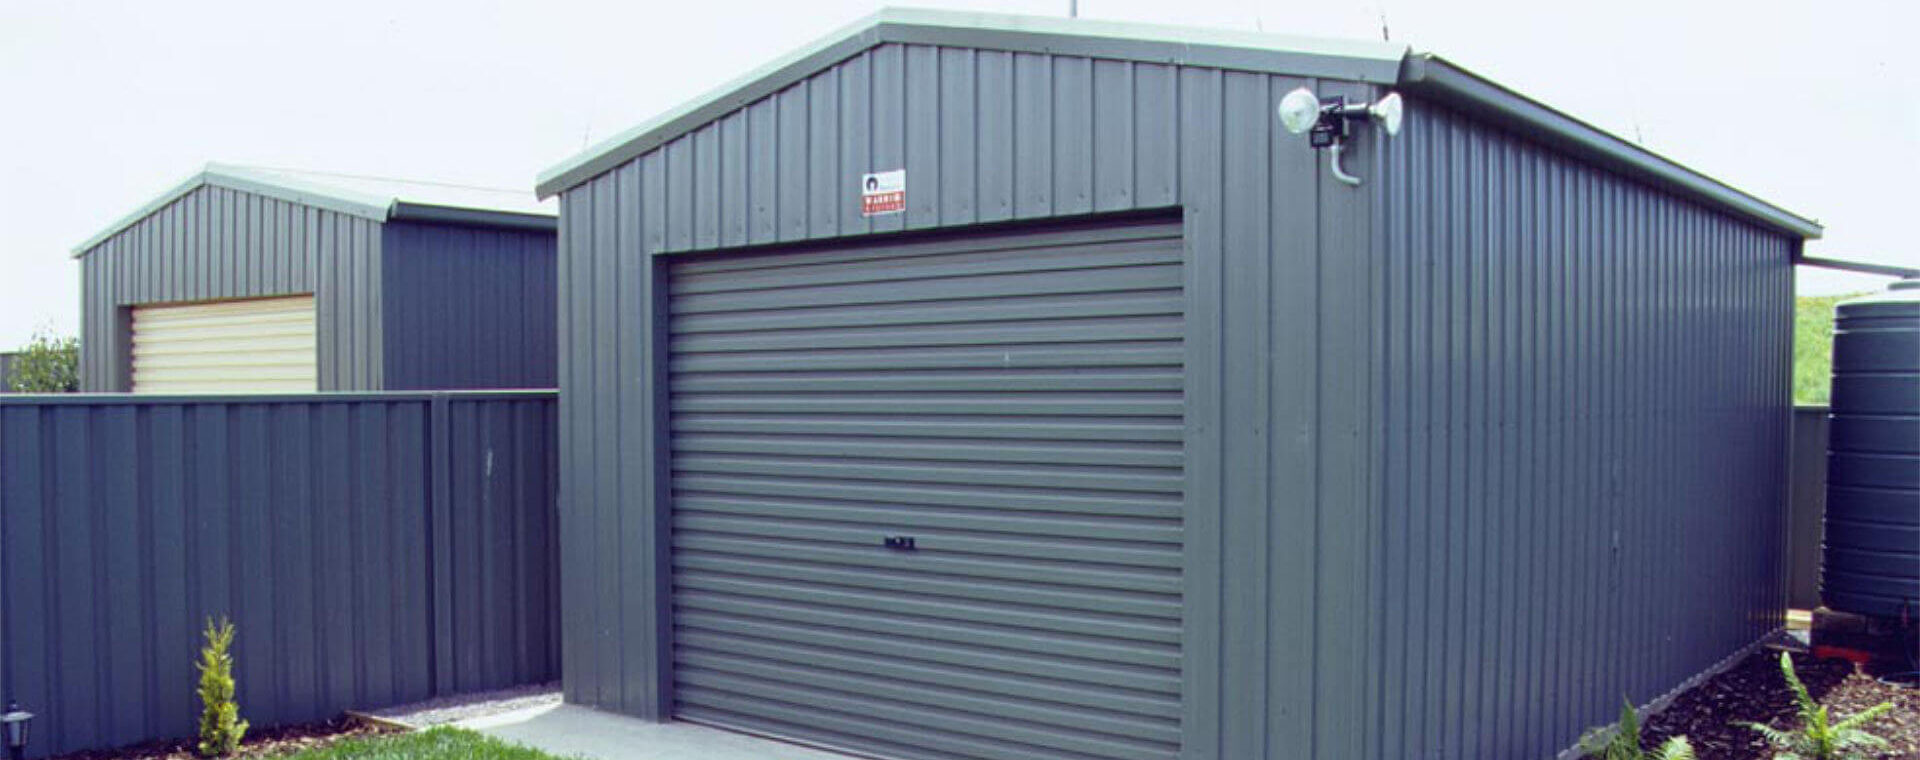 DIY Sheds and Roller doors<span> in South Australia</span>